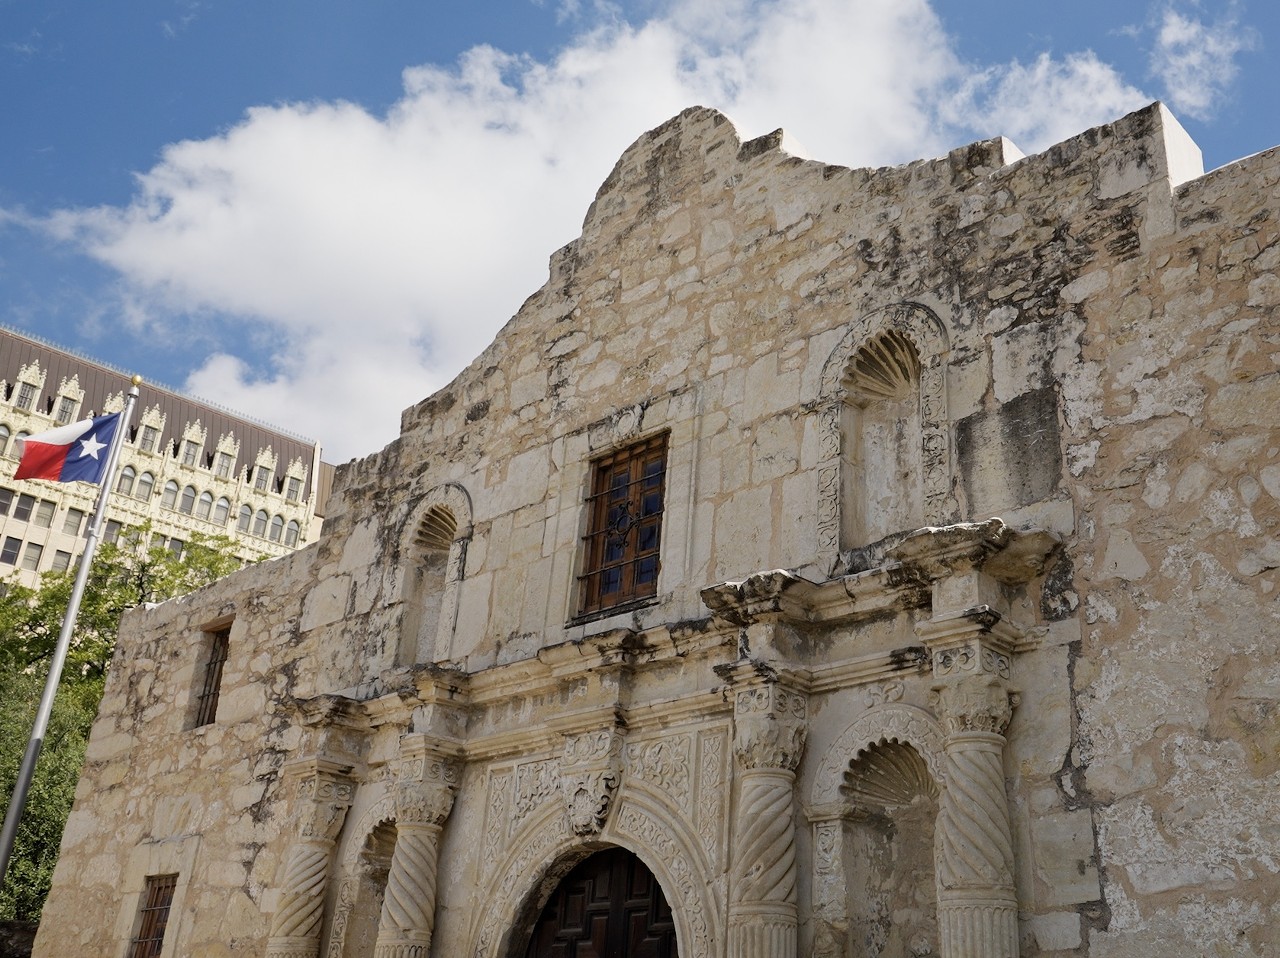 The Alamo
300 Alamo Plaza, (210) 225-1391, thealamo.org
San Antonio’s best-known historic landmark is often described as “overrated,” but it’s an indelible part of the city’s history. Tourists, recent transplants and locals alike should make at least one excursion to the famed mission.